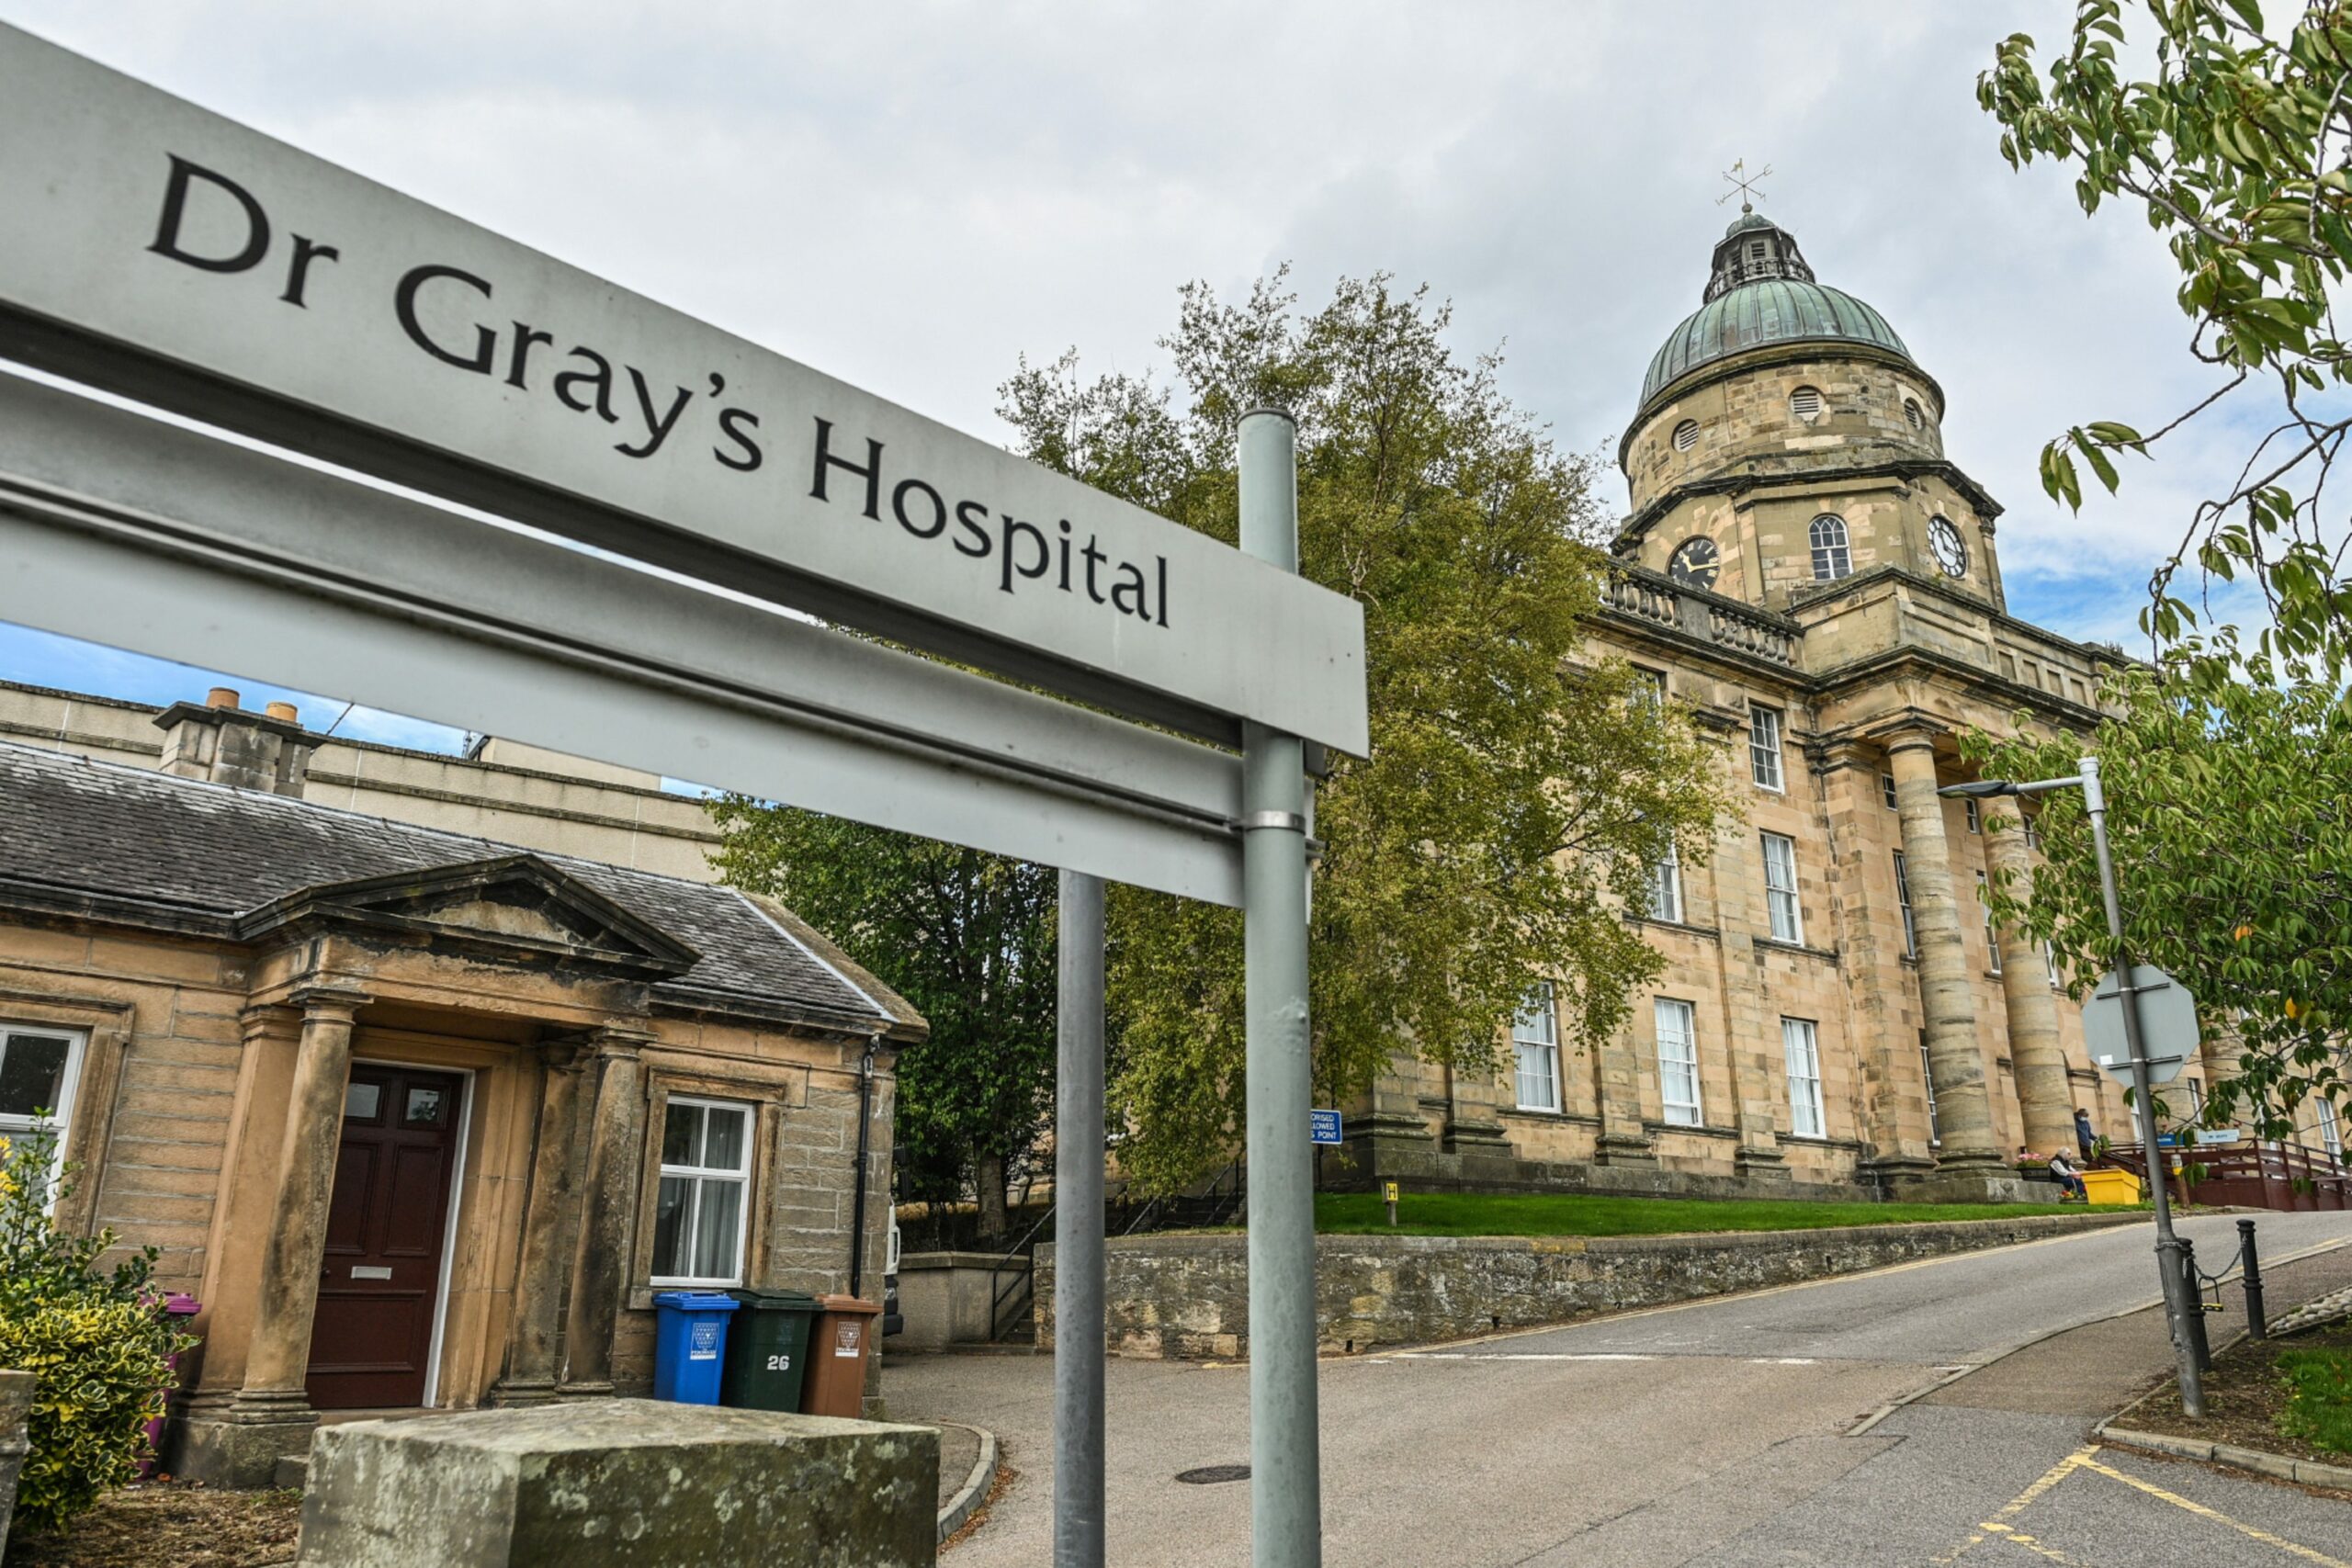 Dr Gray's hospital in Elgin. NHS Grampian bosses will discuss the health board's budget on Thursday. Image: Jason Hedges/DC Thomson.